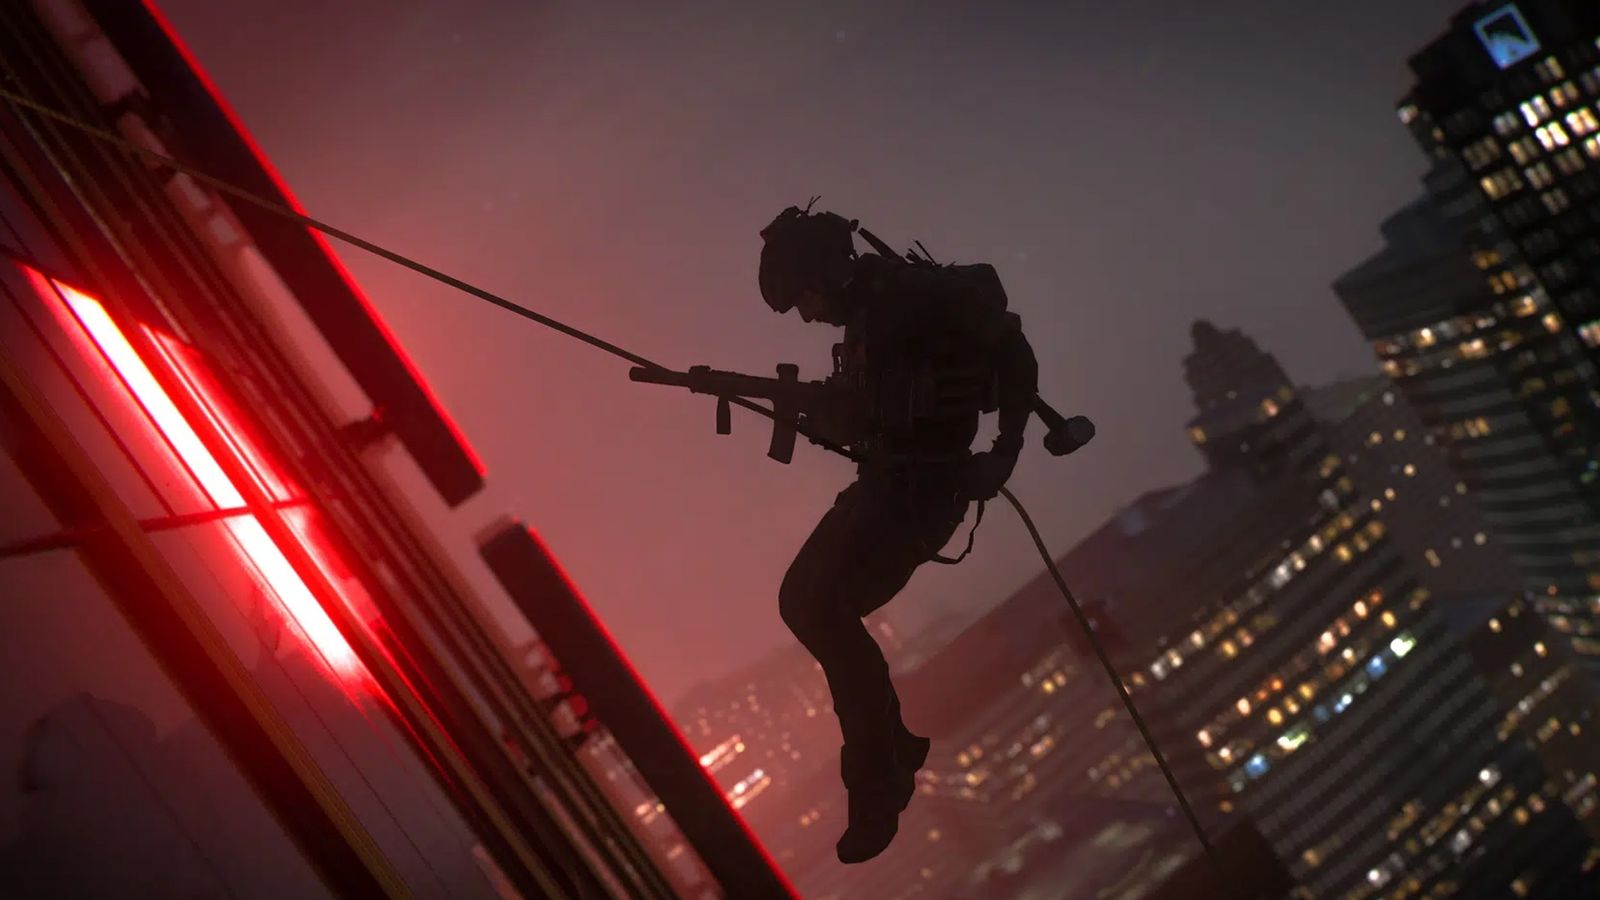 Image showing Modern Warfare 2 player abseiling down skyscraper